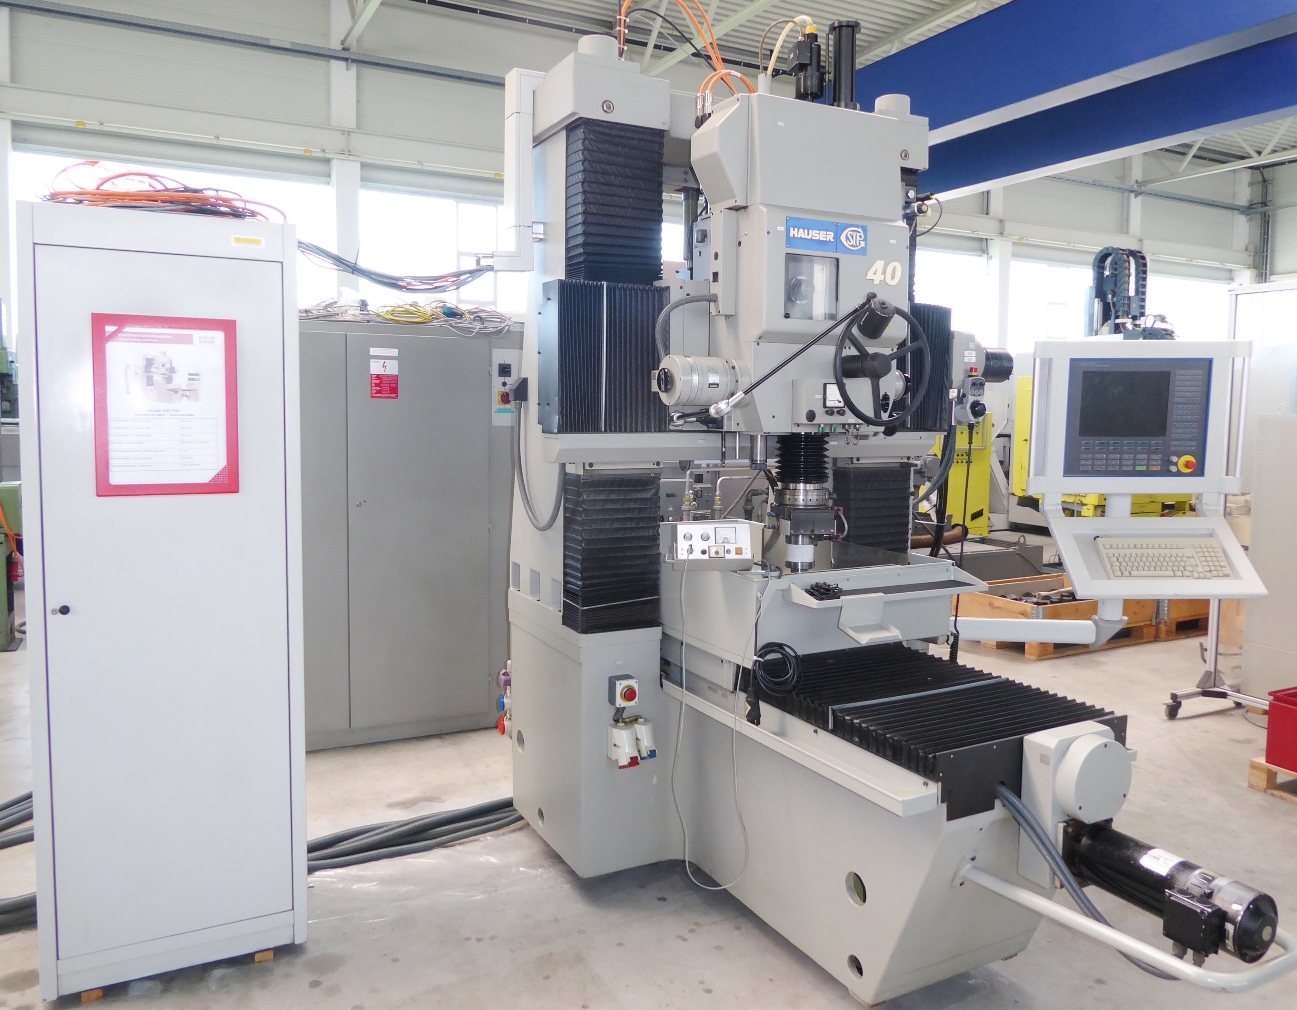 Internal Grinders/HAUSER(CH) S 40 - CNC with ADCOS CNC 400